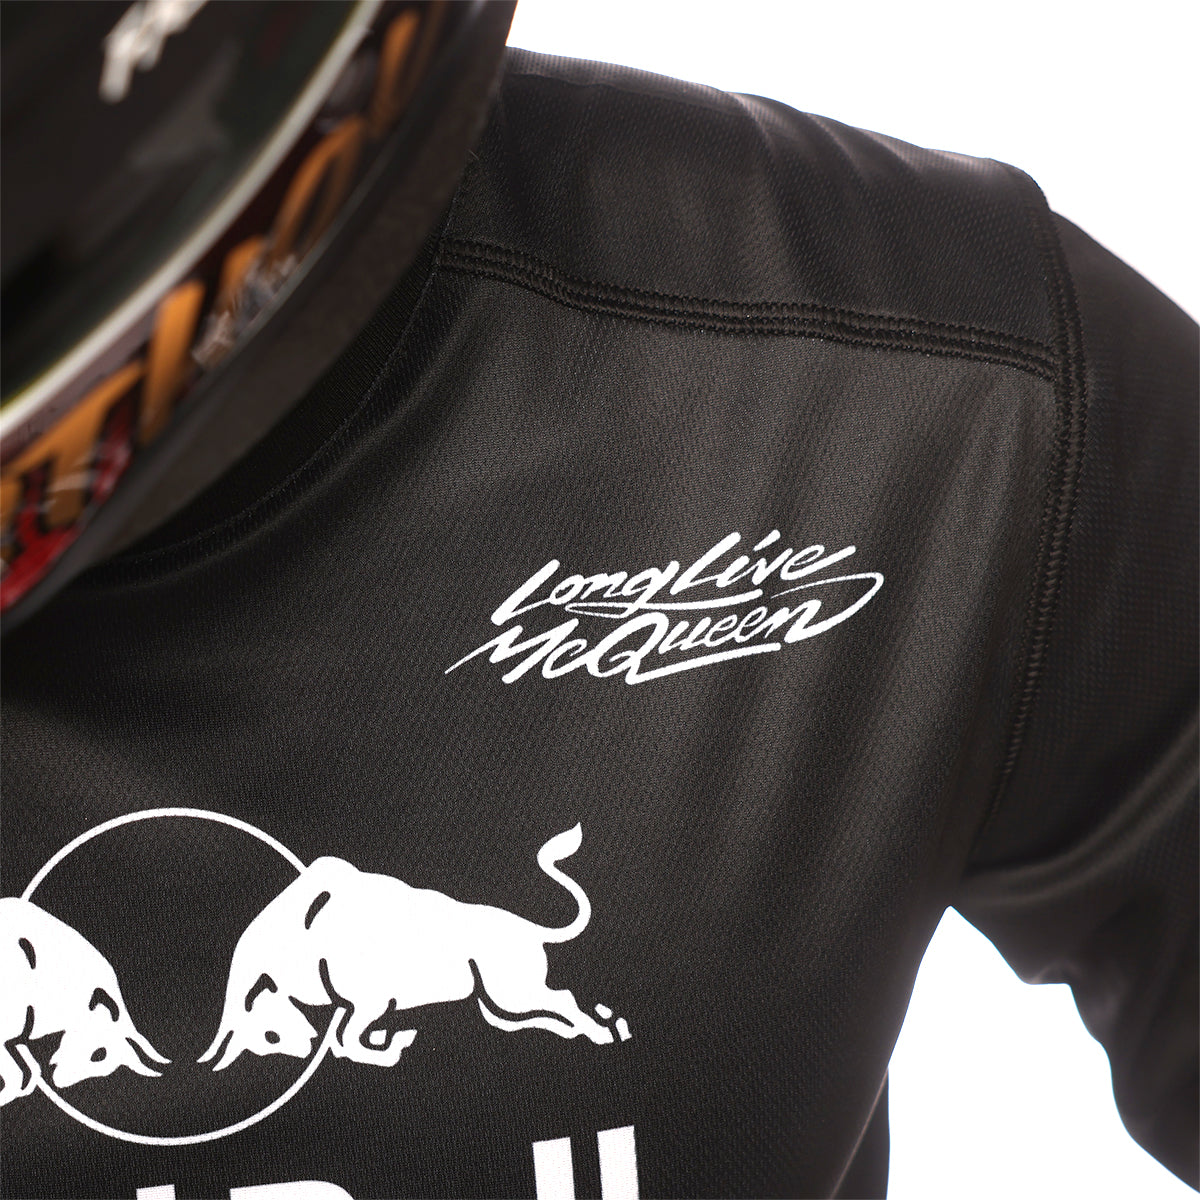 Red Bull Day in The Dirt 26 Jersey - Black/White